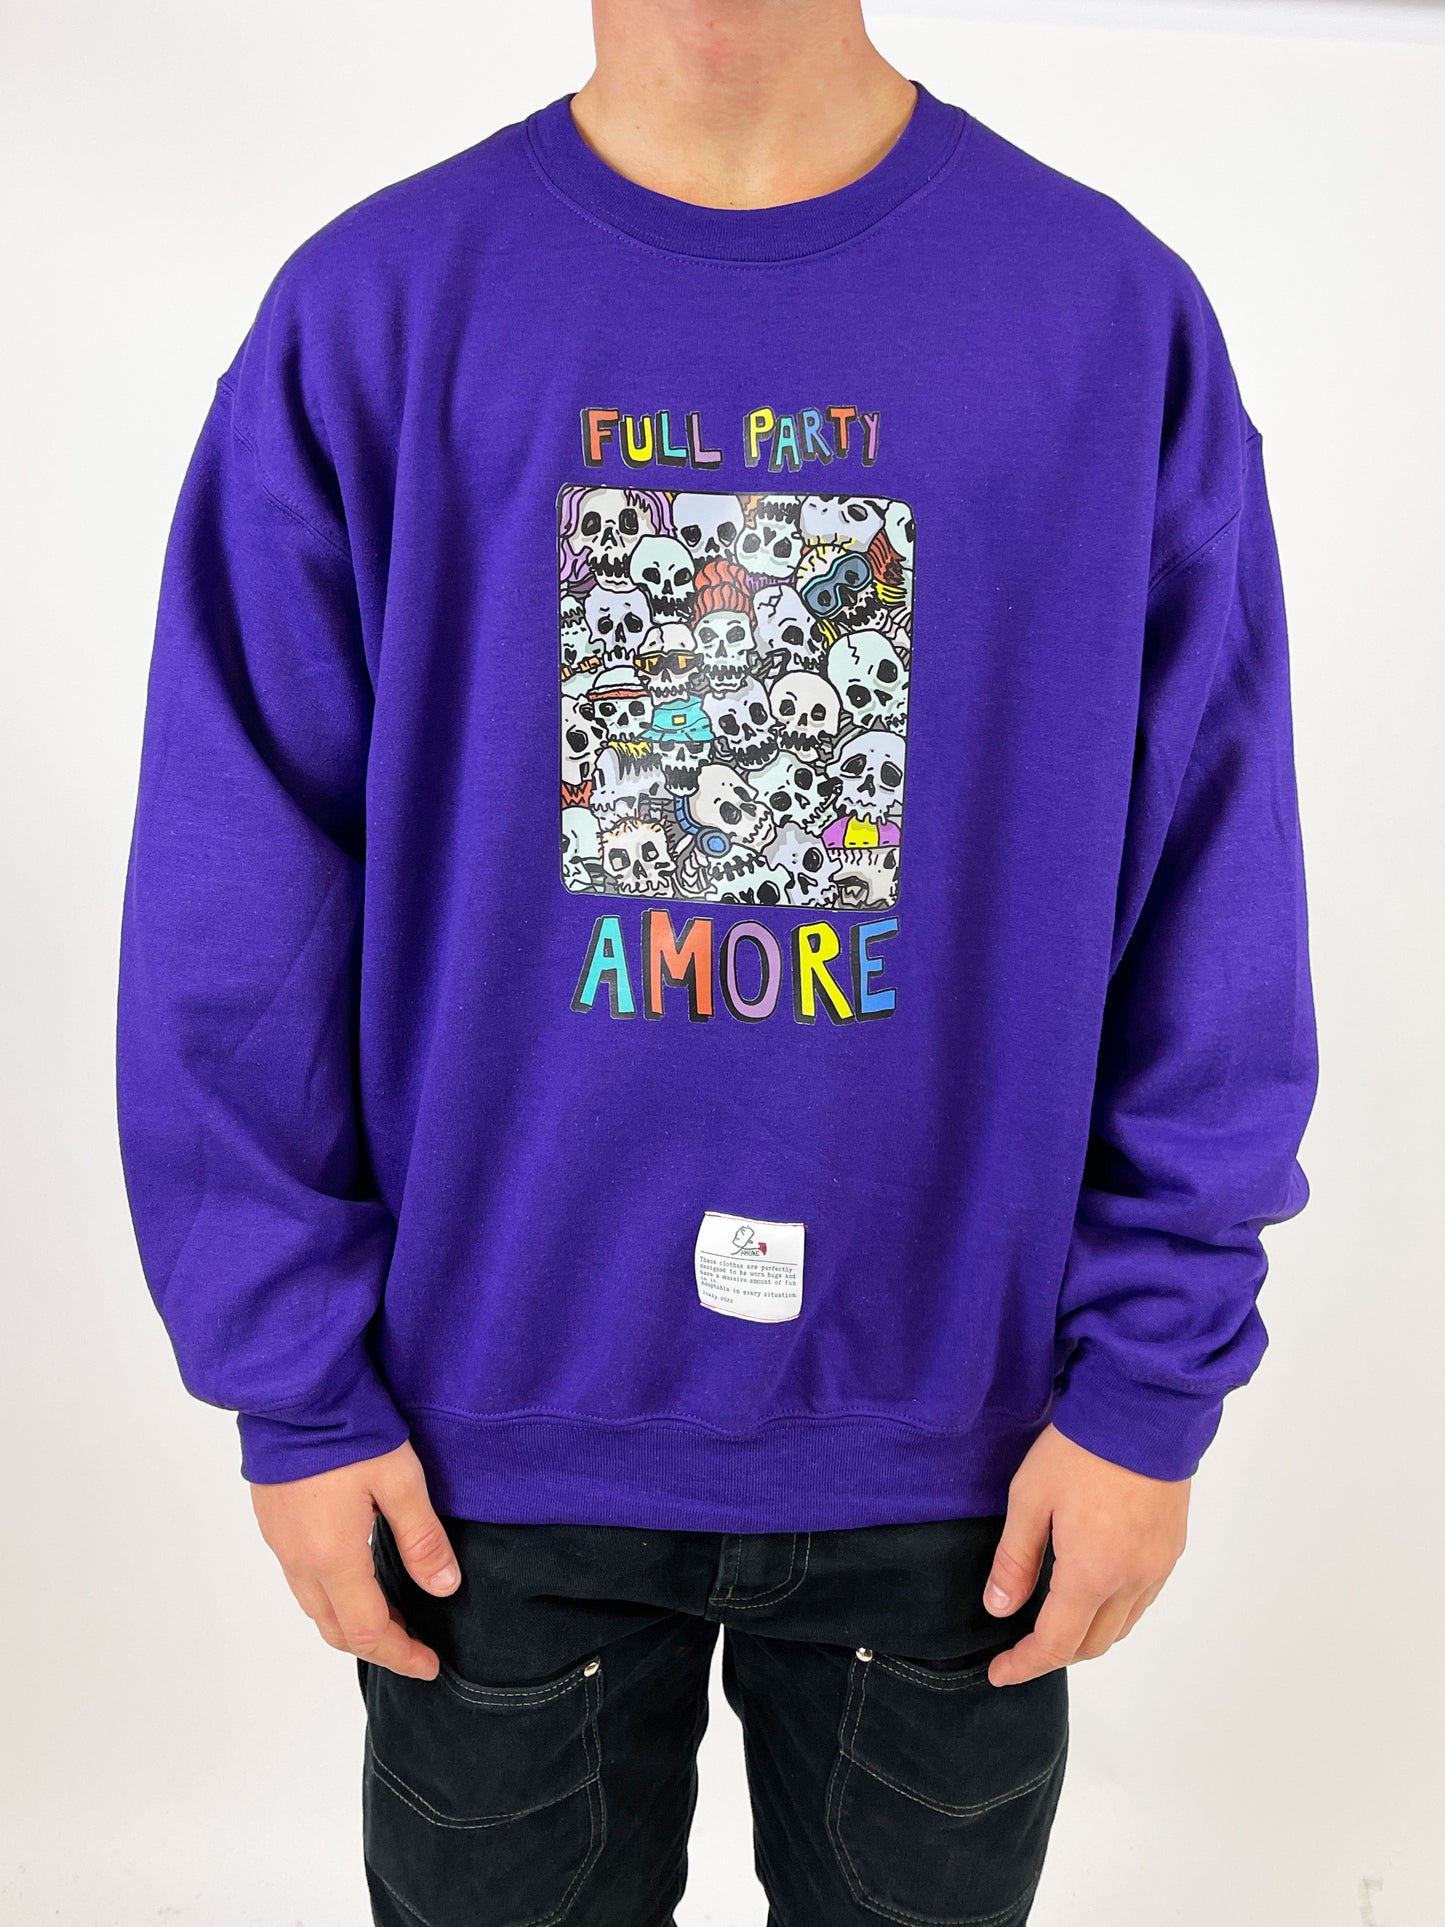 AMORE - Full Party Crewneck